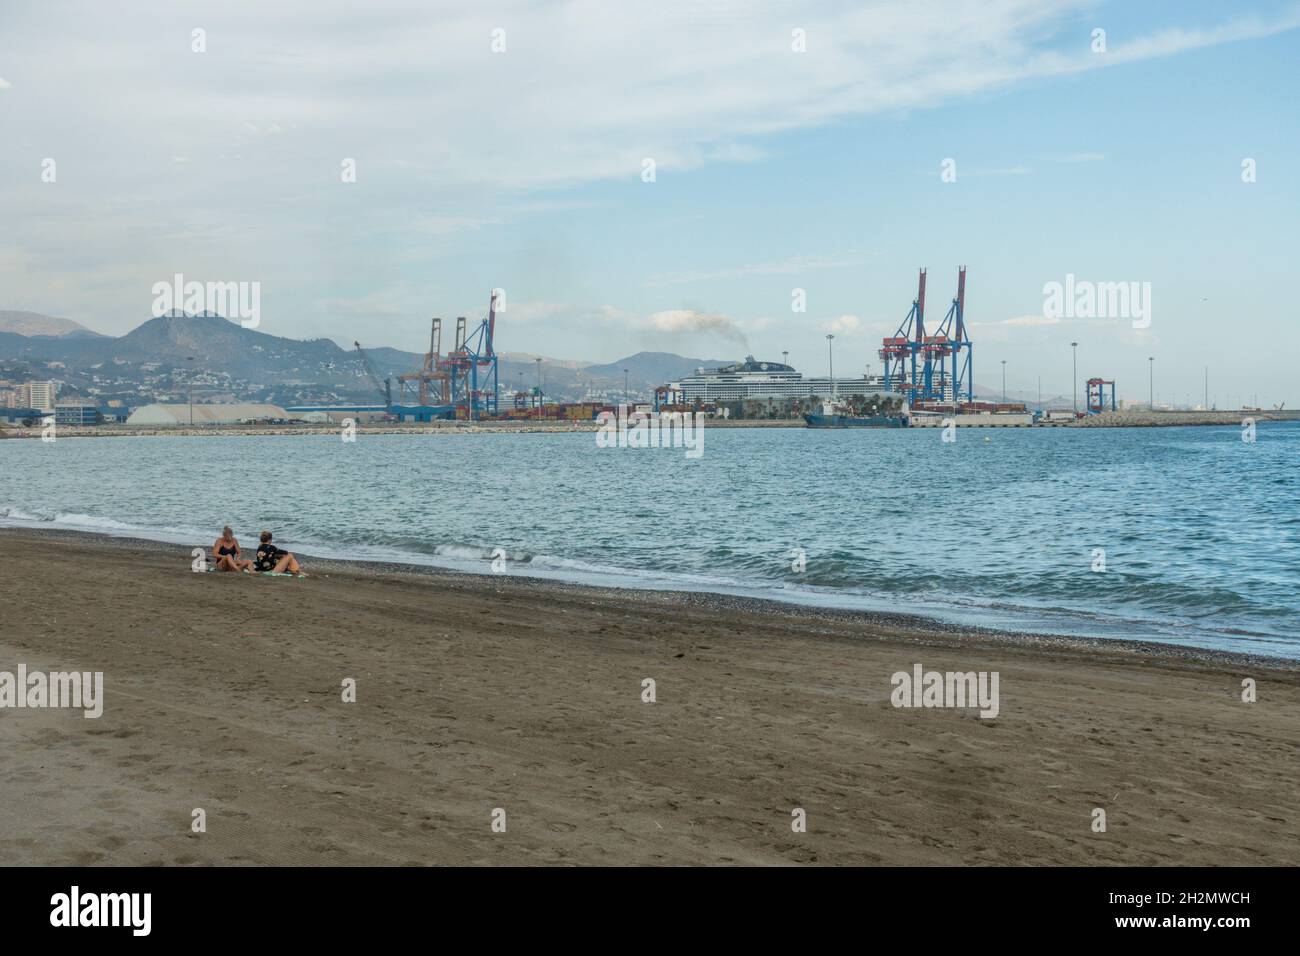 People on Huelin beach in autumn, with the industrial setting cargo port and cranes behind, Malaga, Costa del sol, Spain. Stock Photo